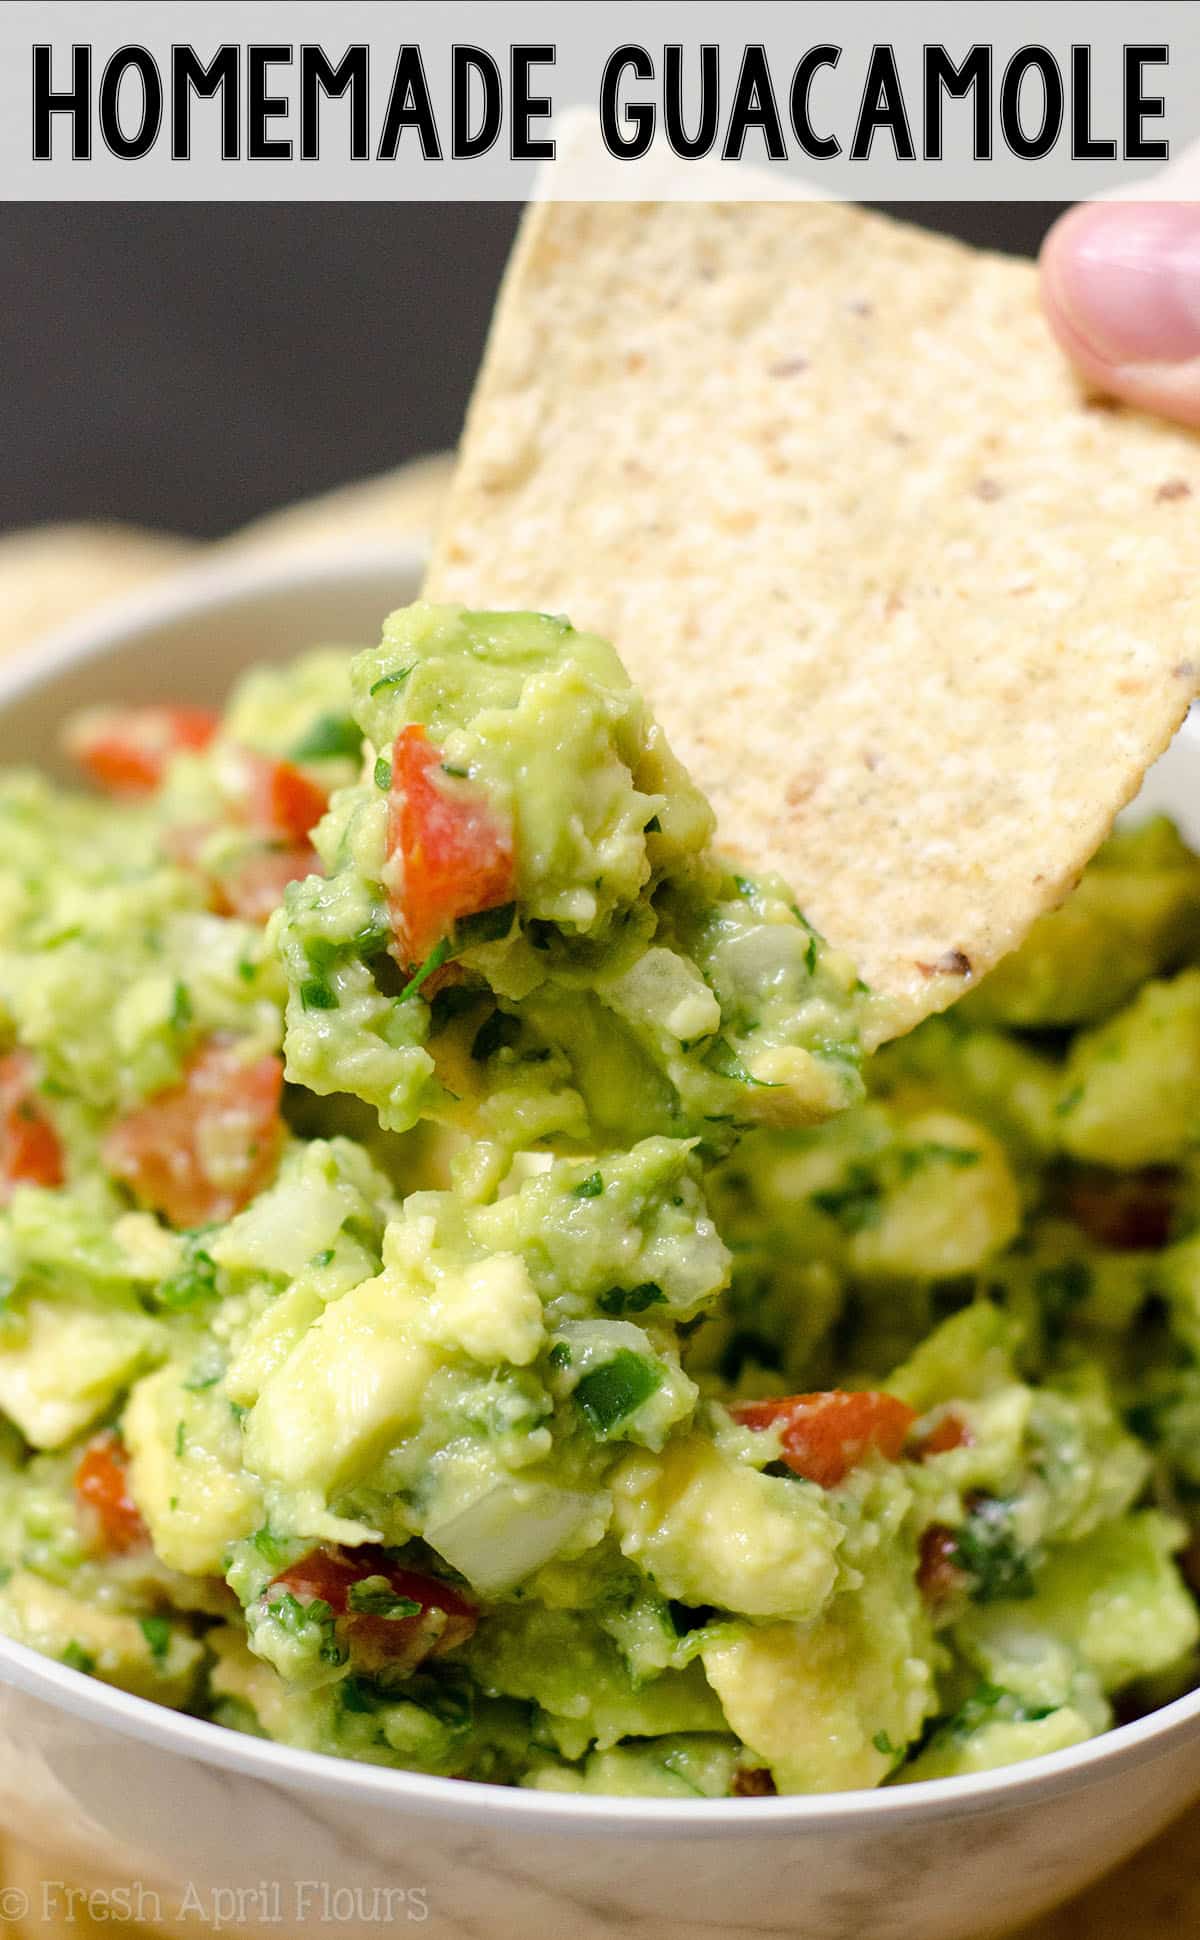 Homemade Guacamole: The secret to making amazing chunky guacamole at home is all in the preparation of the tomato. Find out the best way to create delicious guac in your own kitchen! via @frshaprilflours